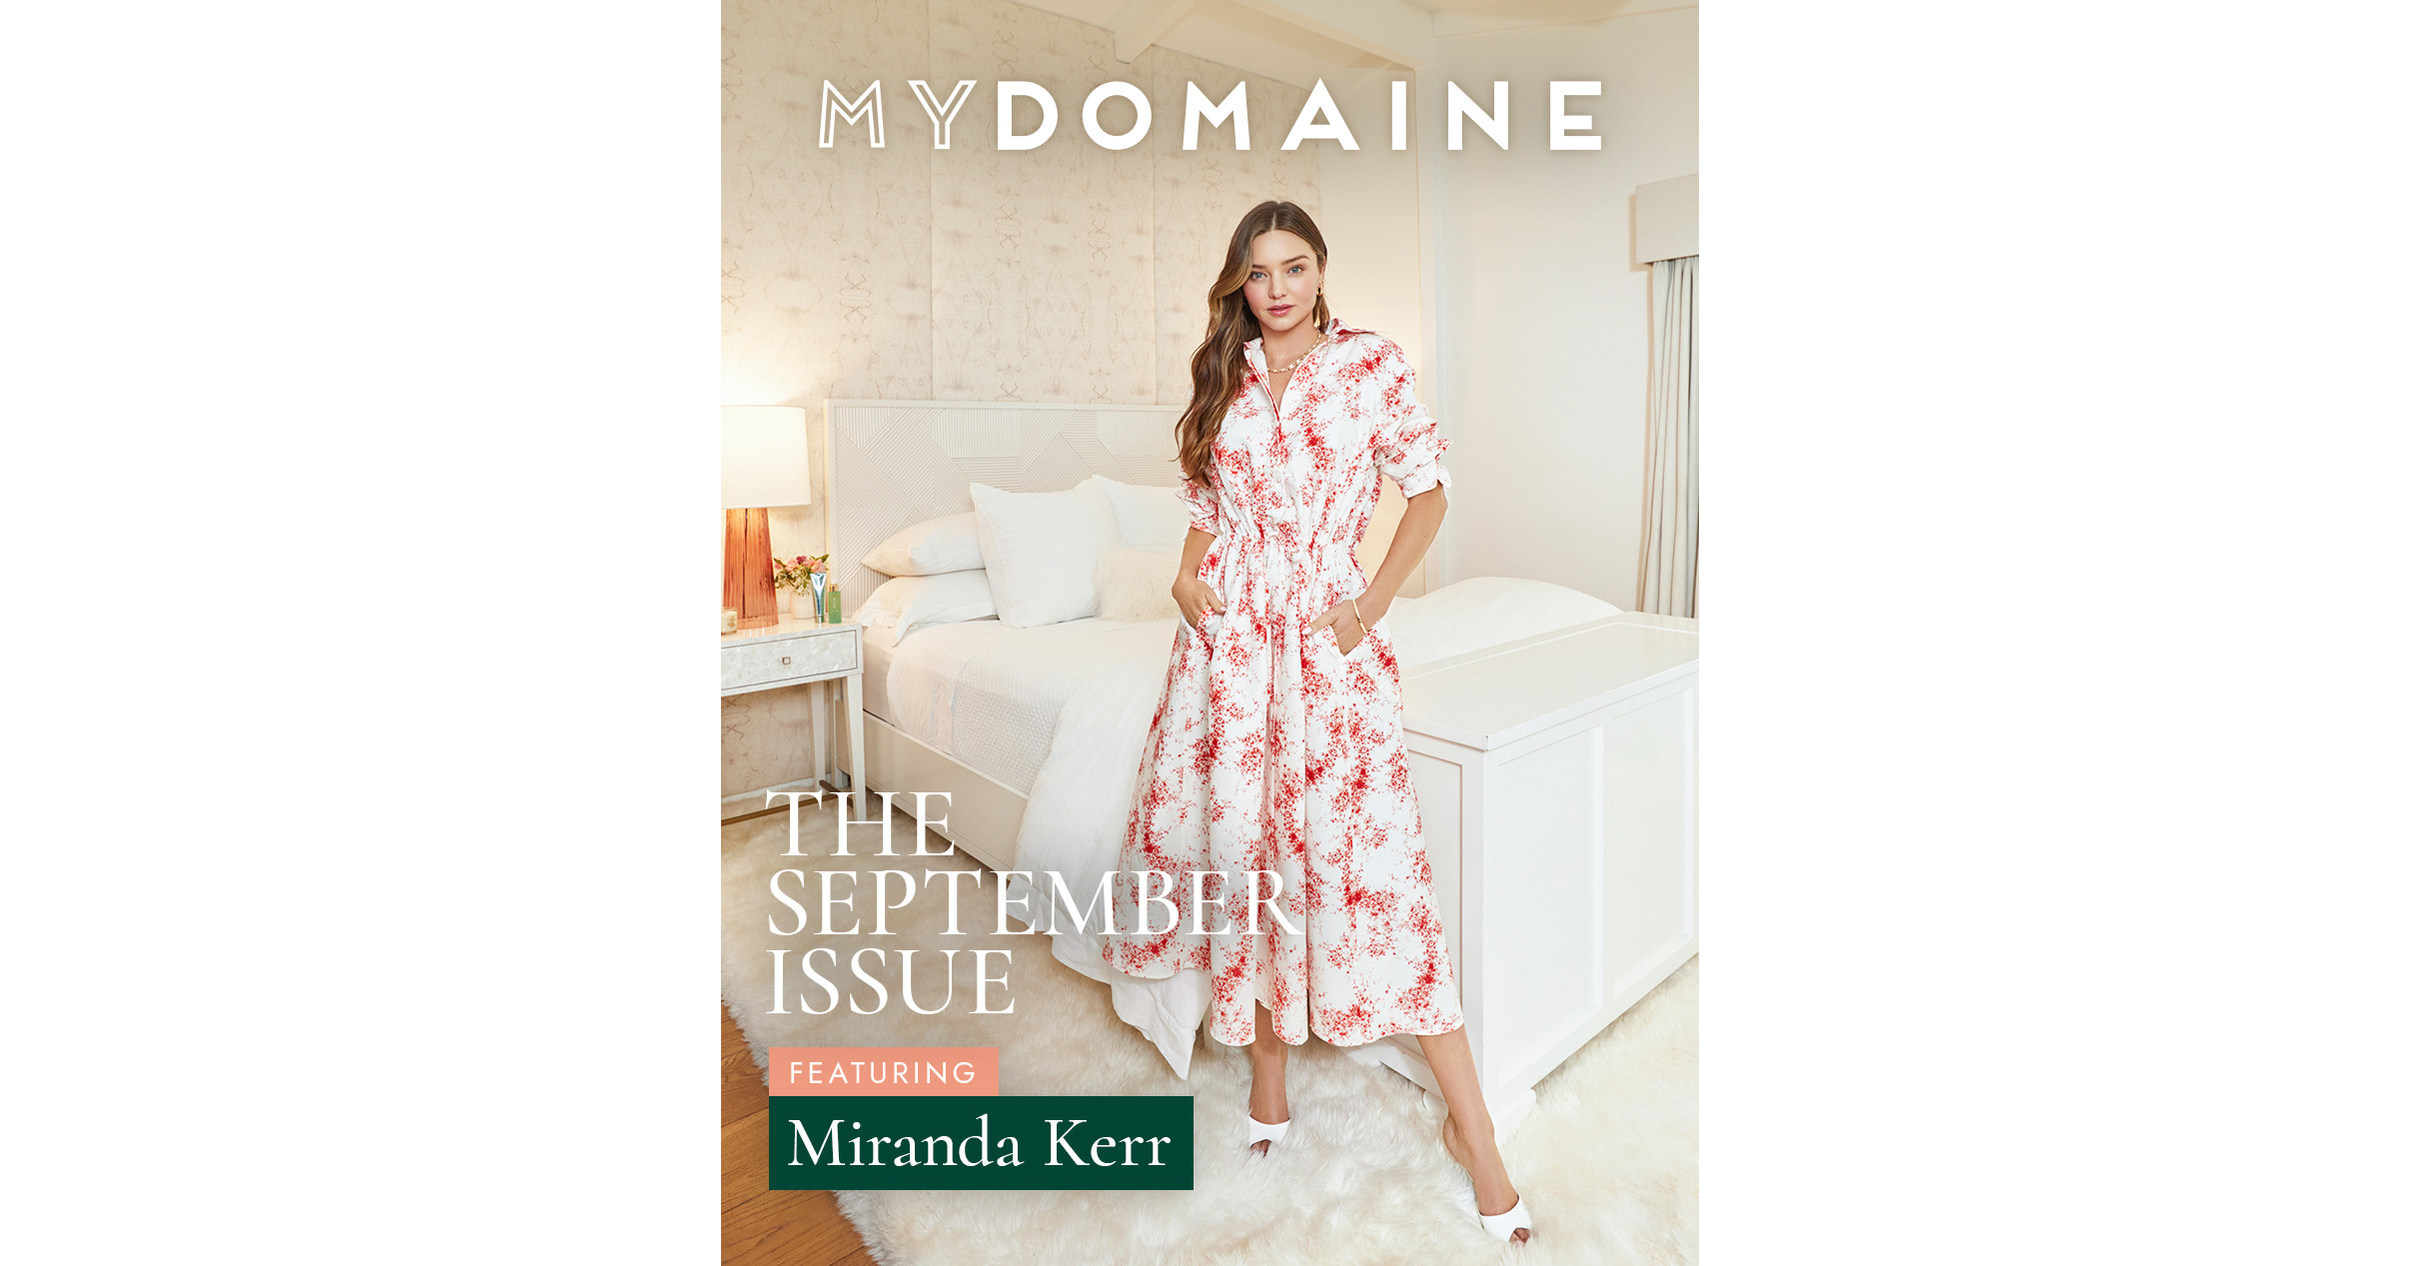 MyDomaine launches its very first digital magazine